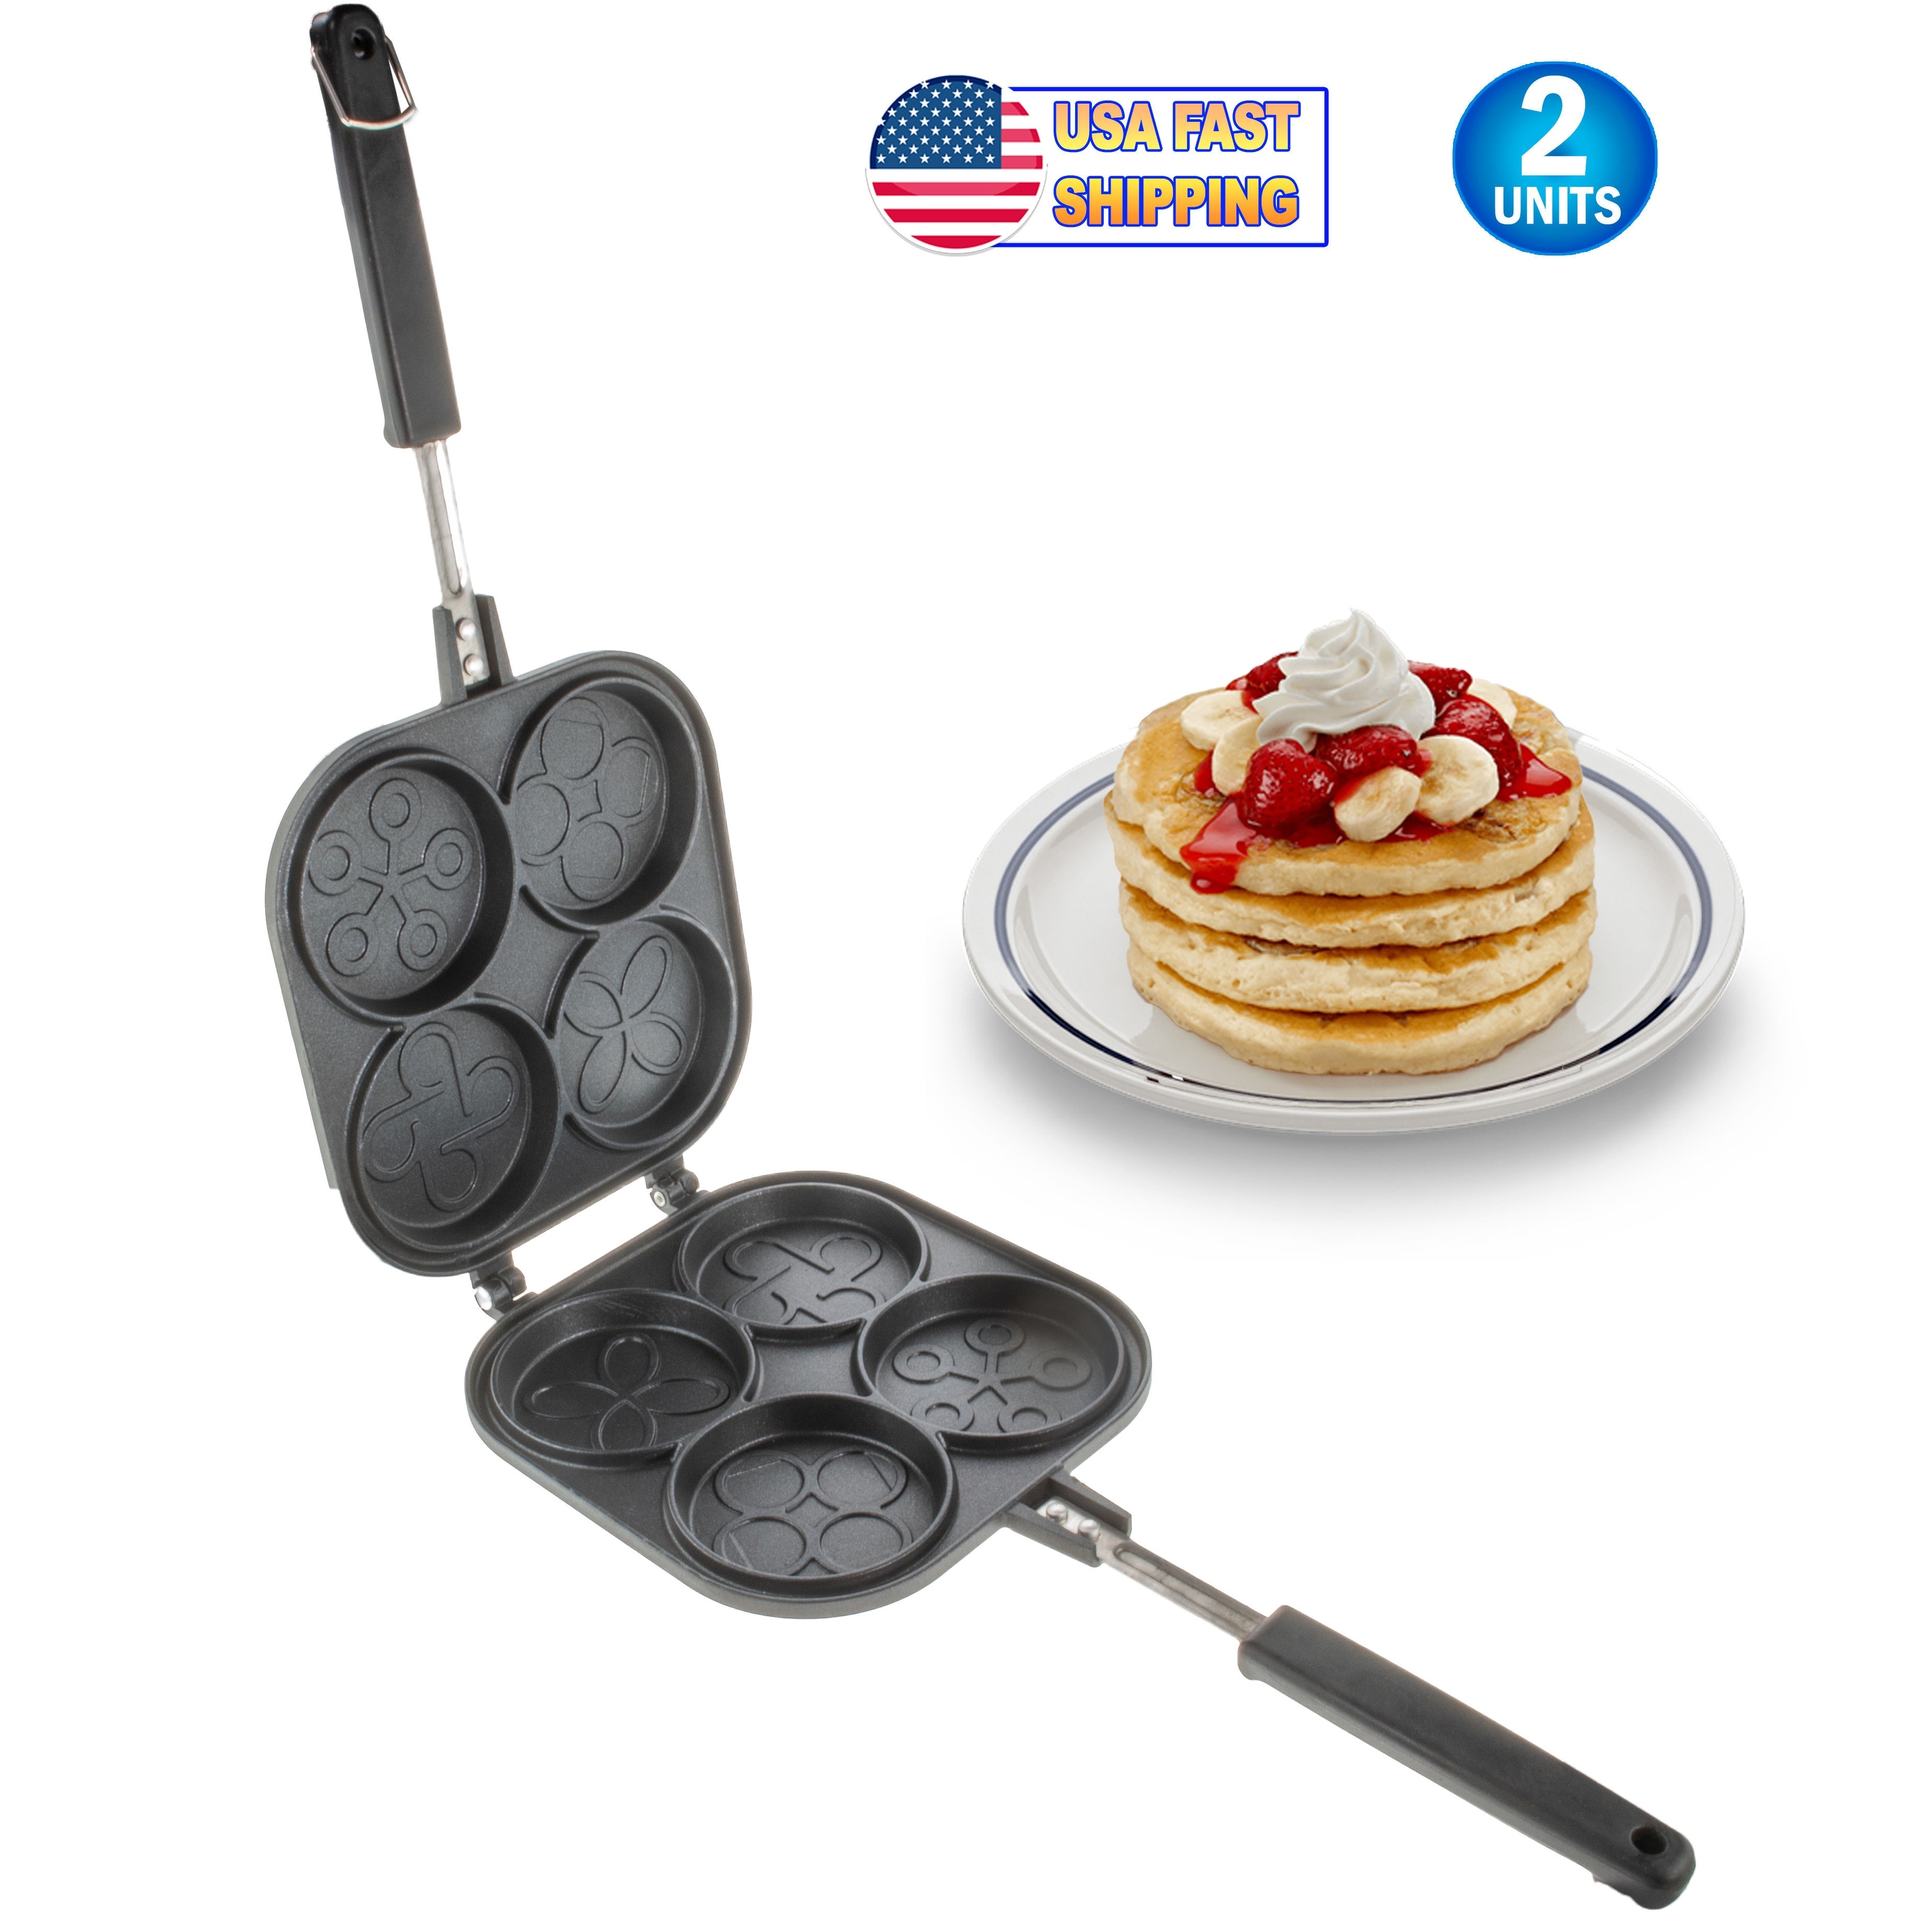 Lodge's Bestselling Round Griddle Is the Key to Perfect Pancakes